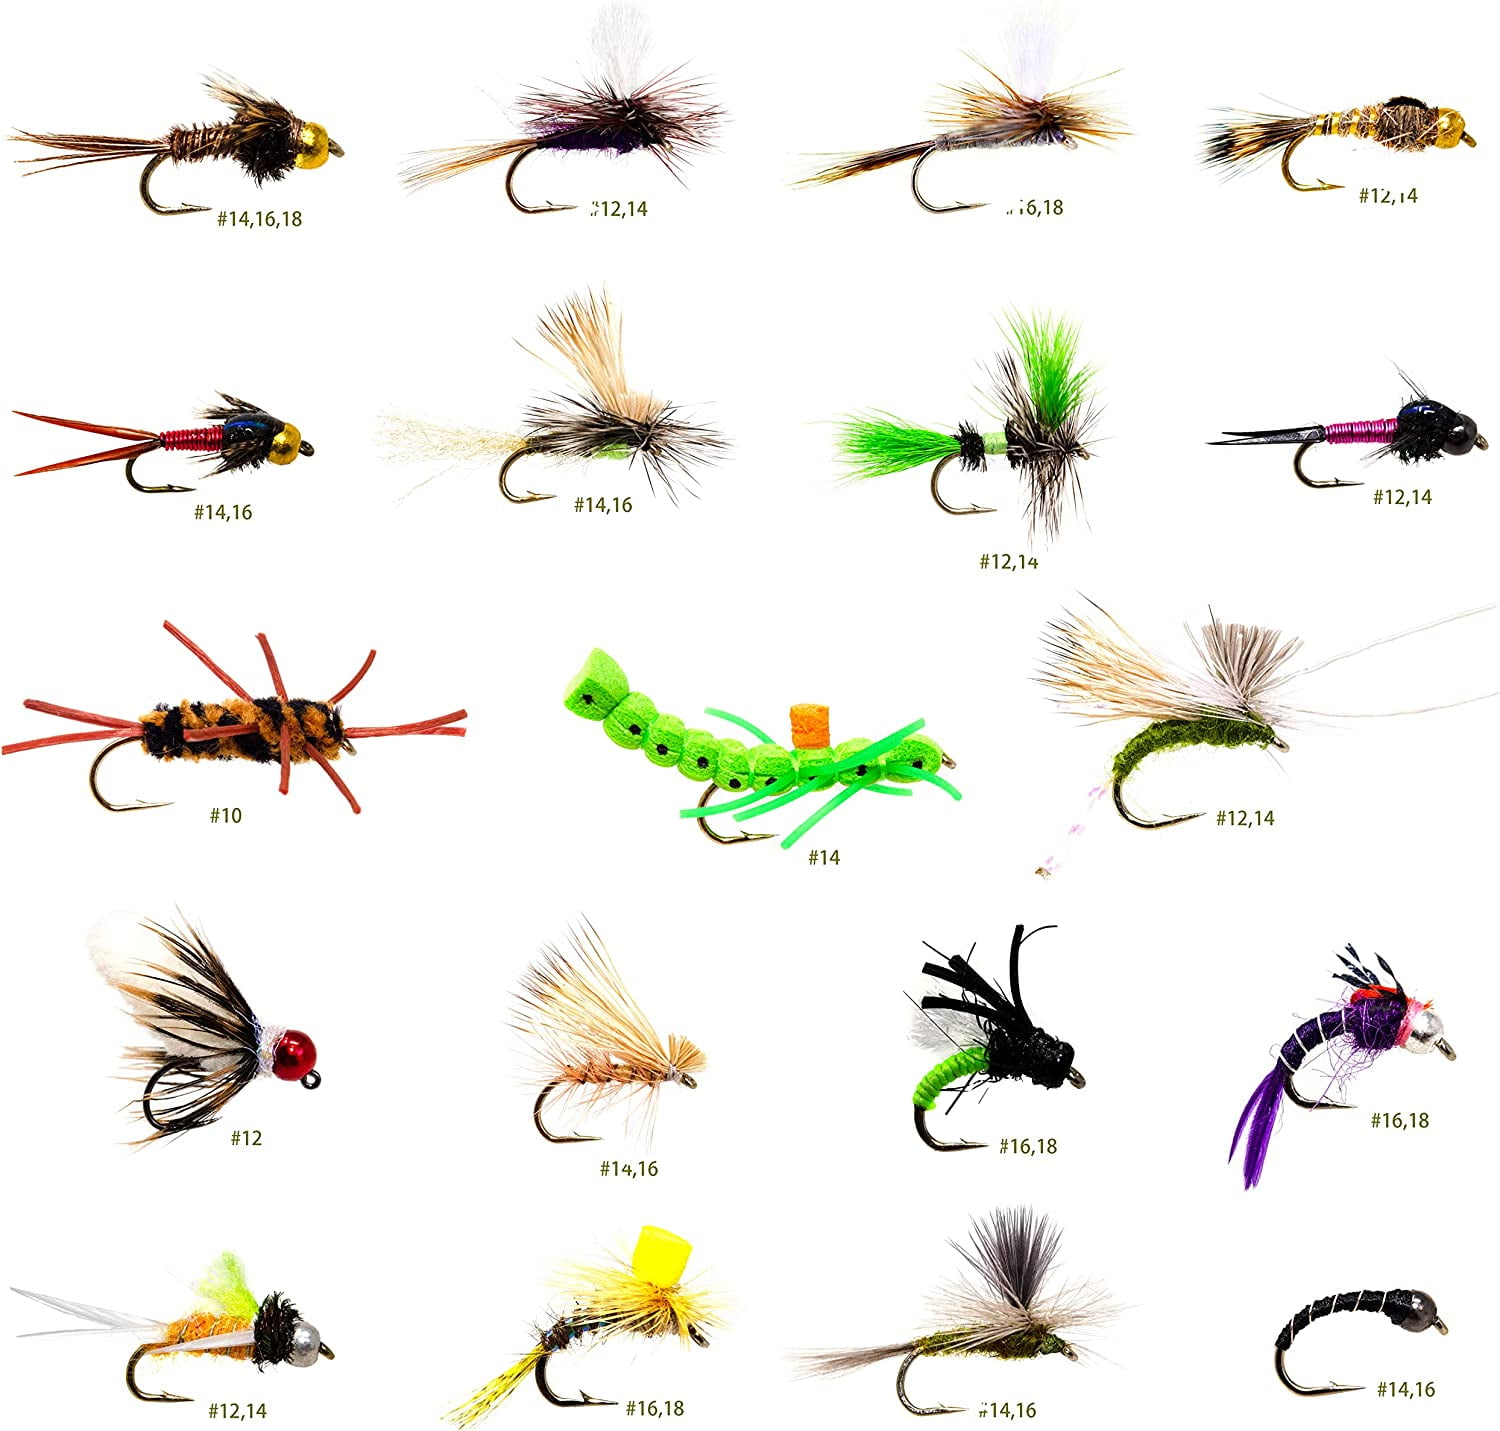 36 Producing Fly Fishing Flies Assortment, Dry, Wet, Nymphs, Caddis,  Hopper Fly Lures